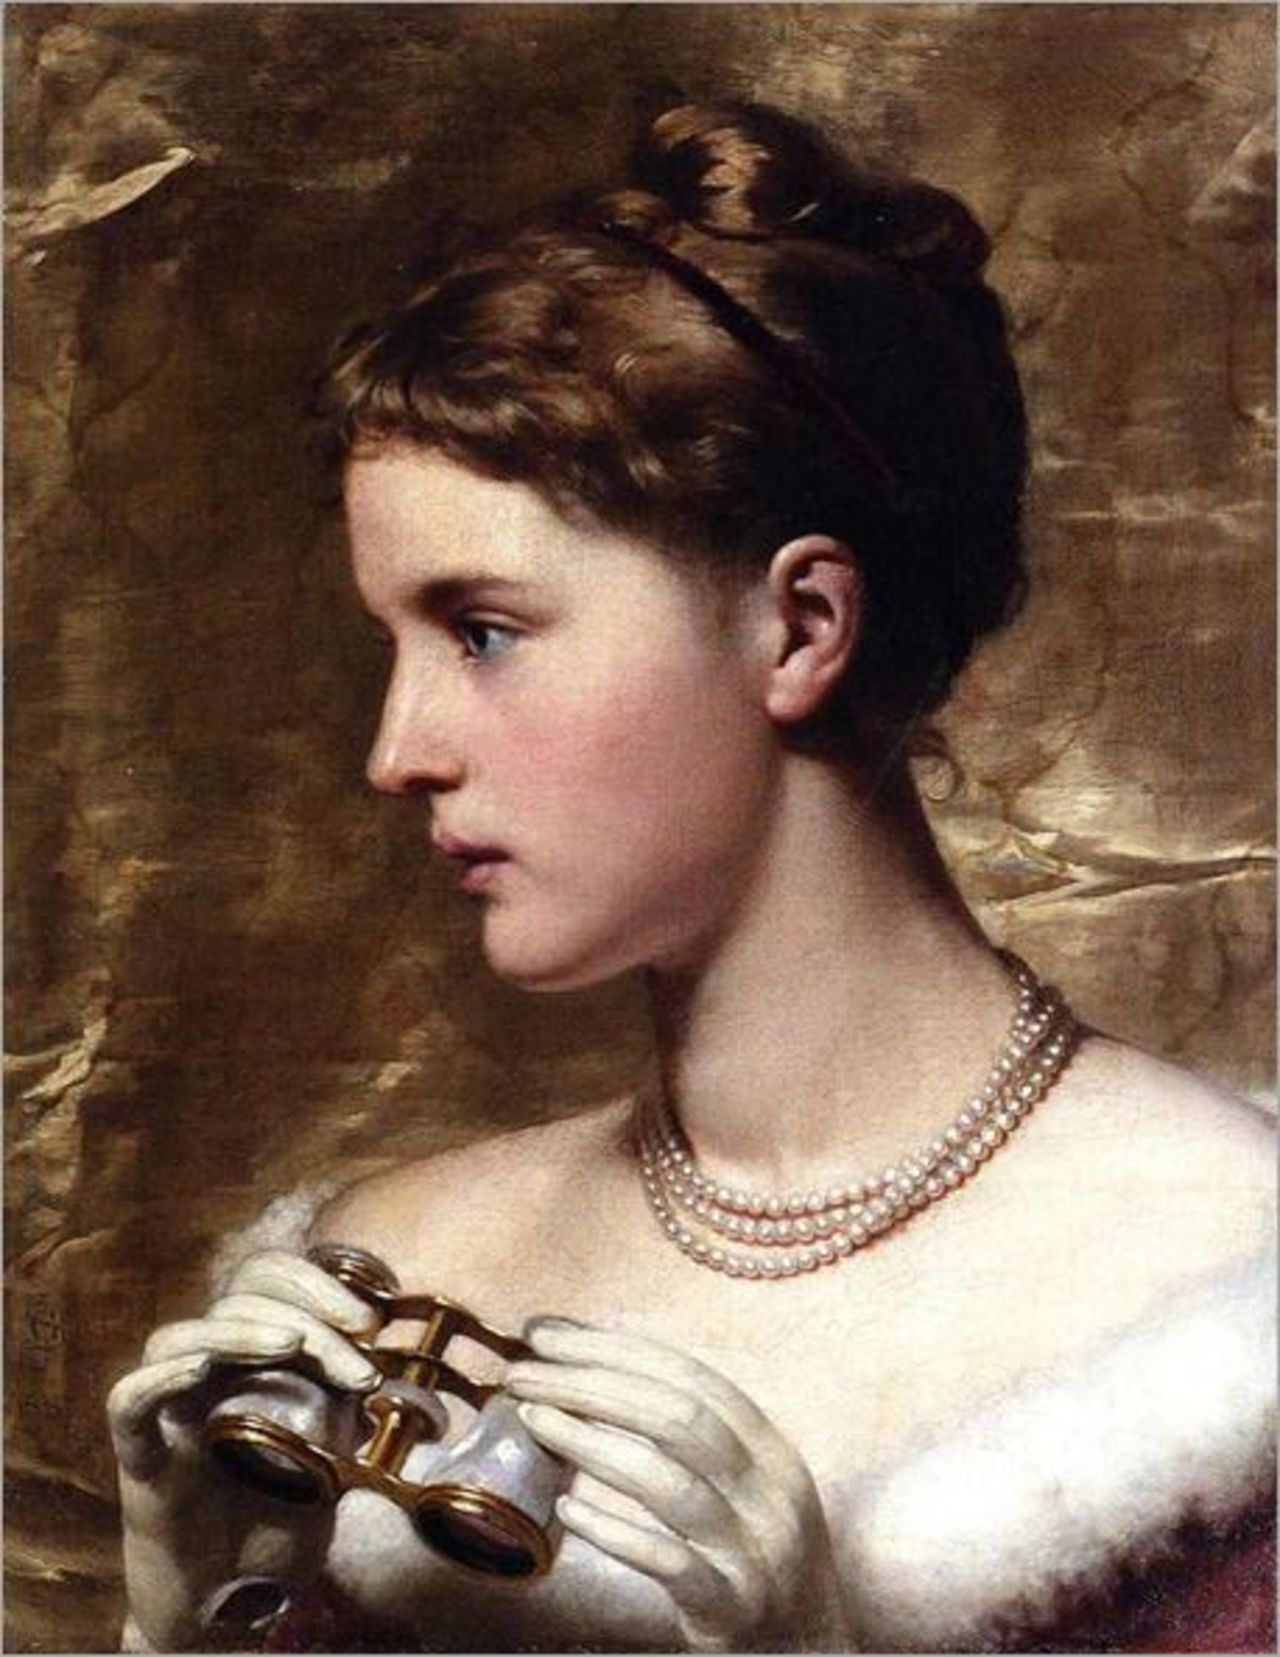 RT @Helisabethhh: Portraits by Gustave Jean Jacquet #art http://t.co/CKNW8CifVI